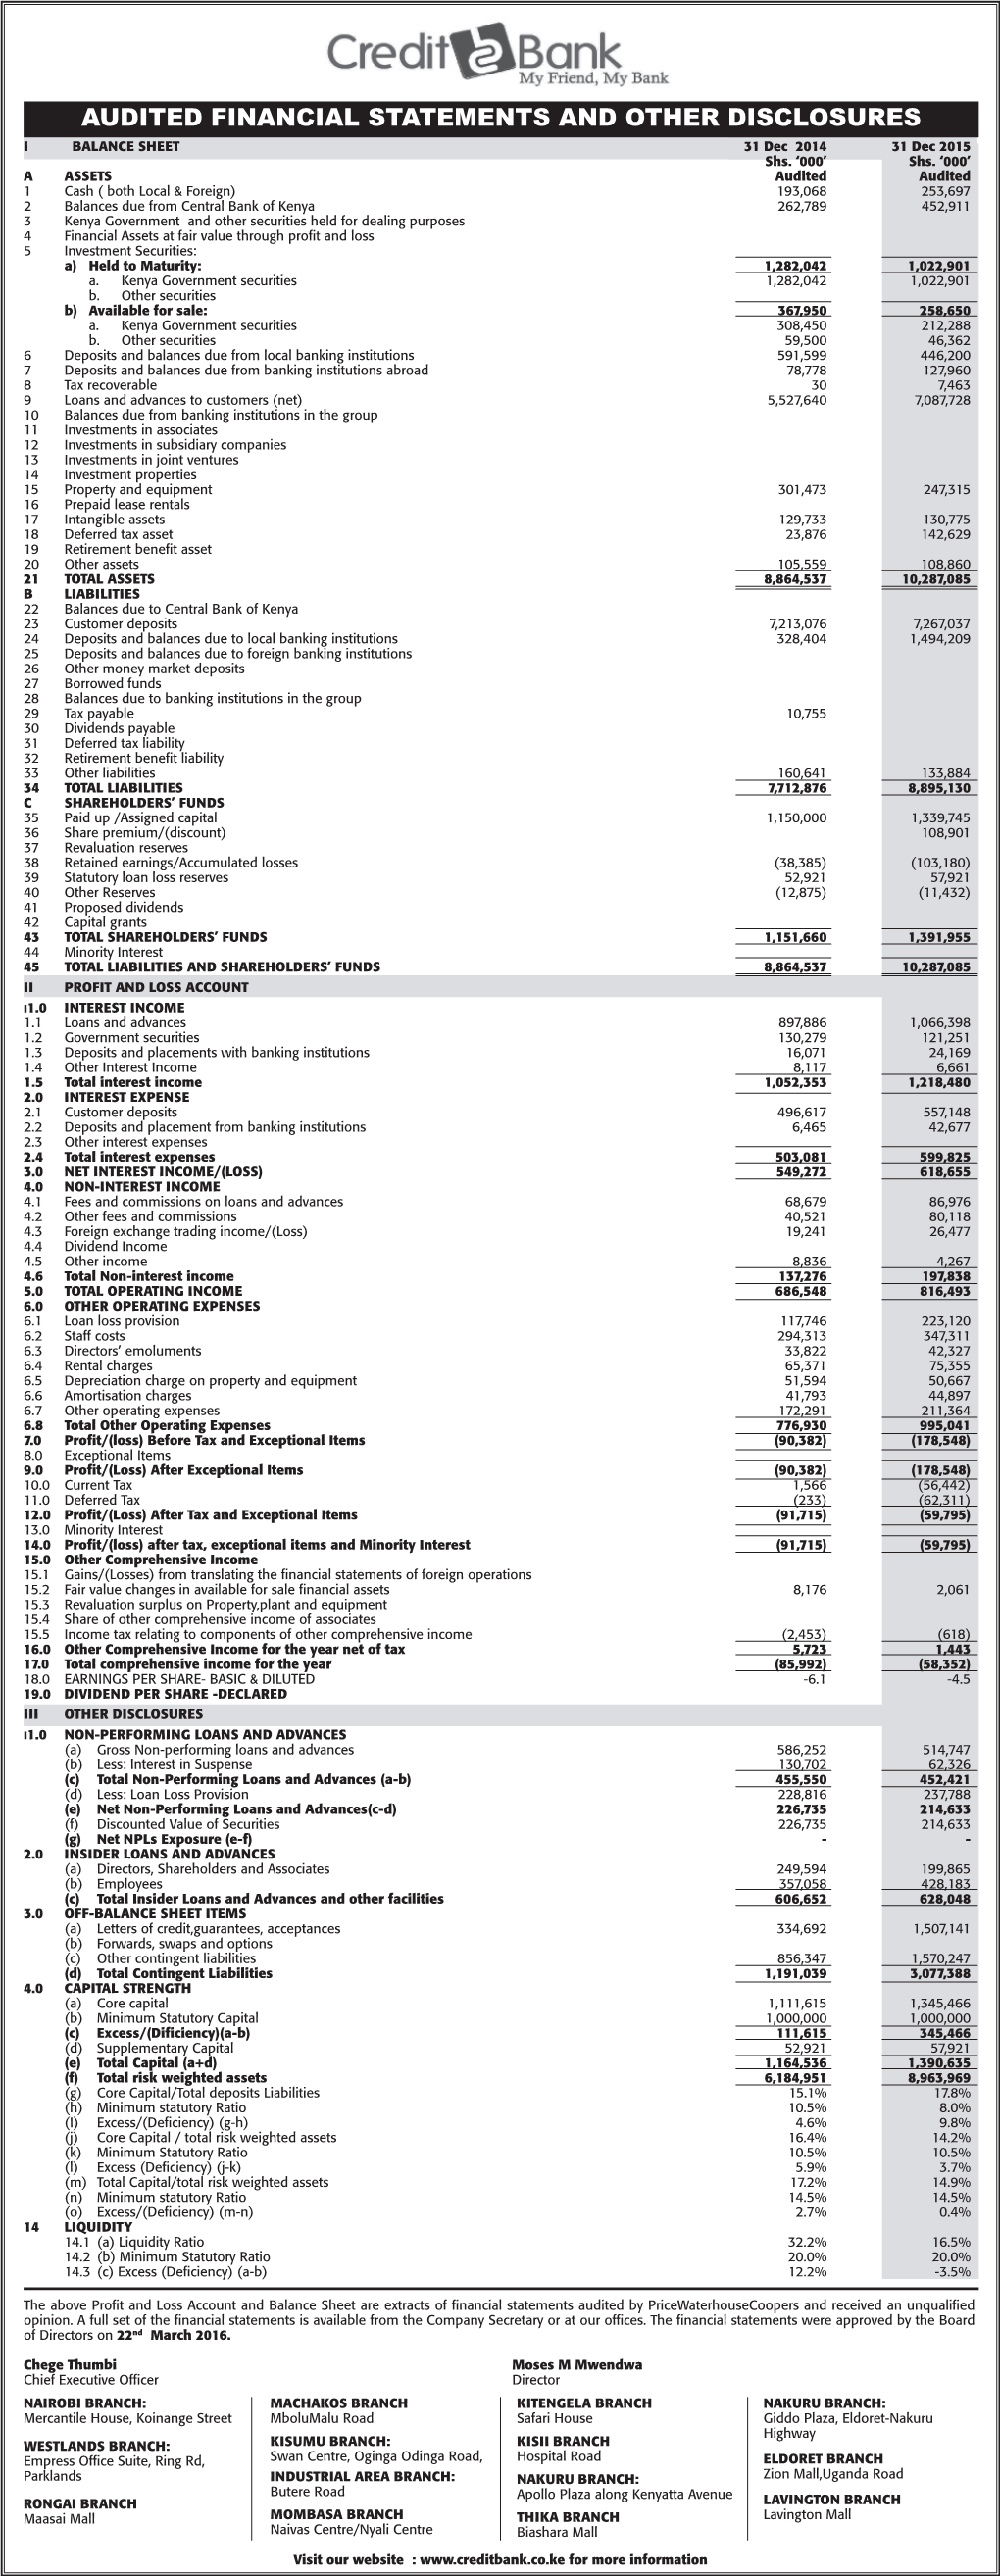 2015 Audited Financial Statements and Other Disclosures